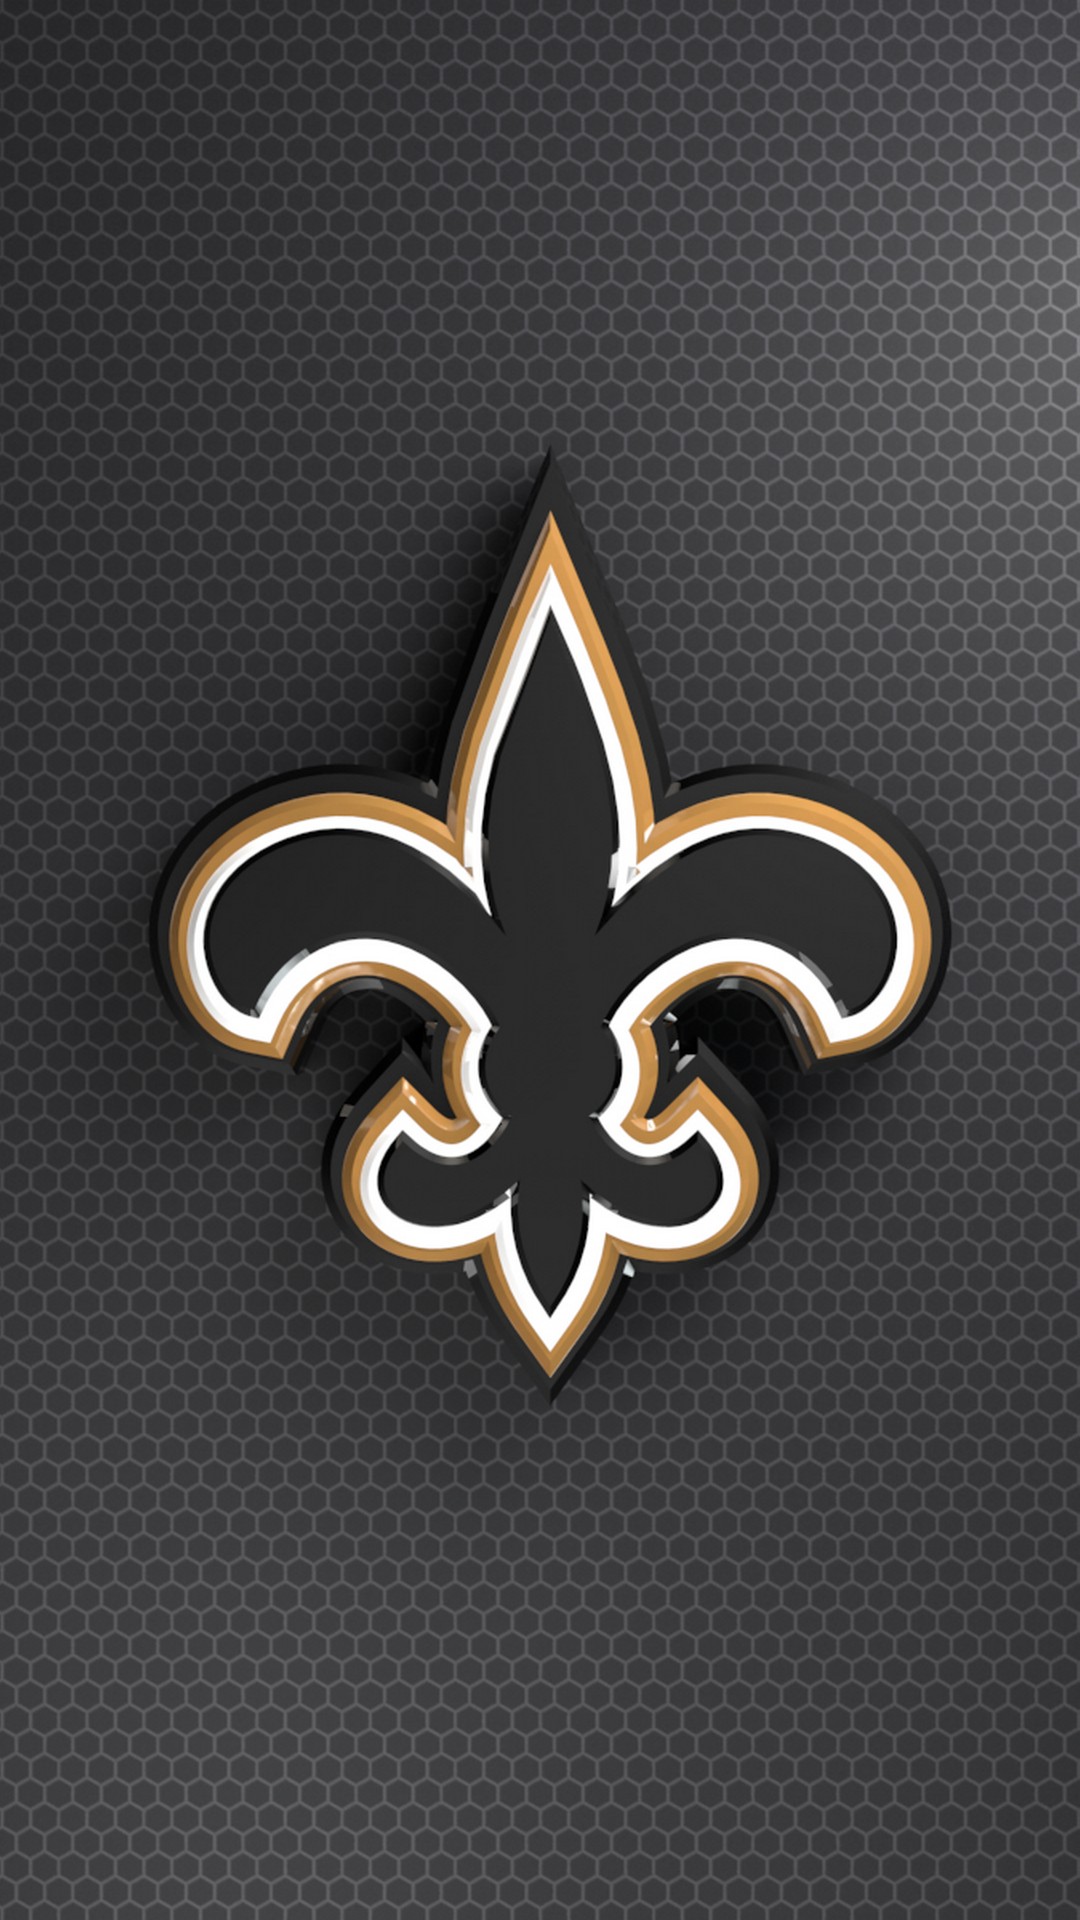 New Orleans Saints iPhone Wallpaper New With high-resolution 1080X1920 pixel. Donwload and set as wallpaper for your iPhone X, iPhone XS home screen backgrounds, XS Max, XR, iPhone8 lock screen wallpaper, iPhone 7, 6, SE, and other mobile devices